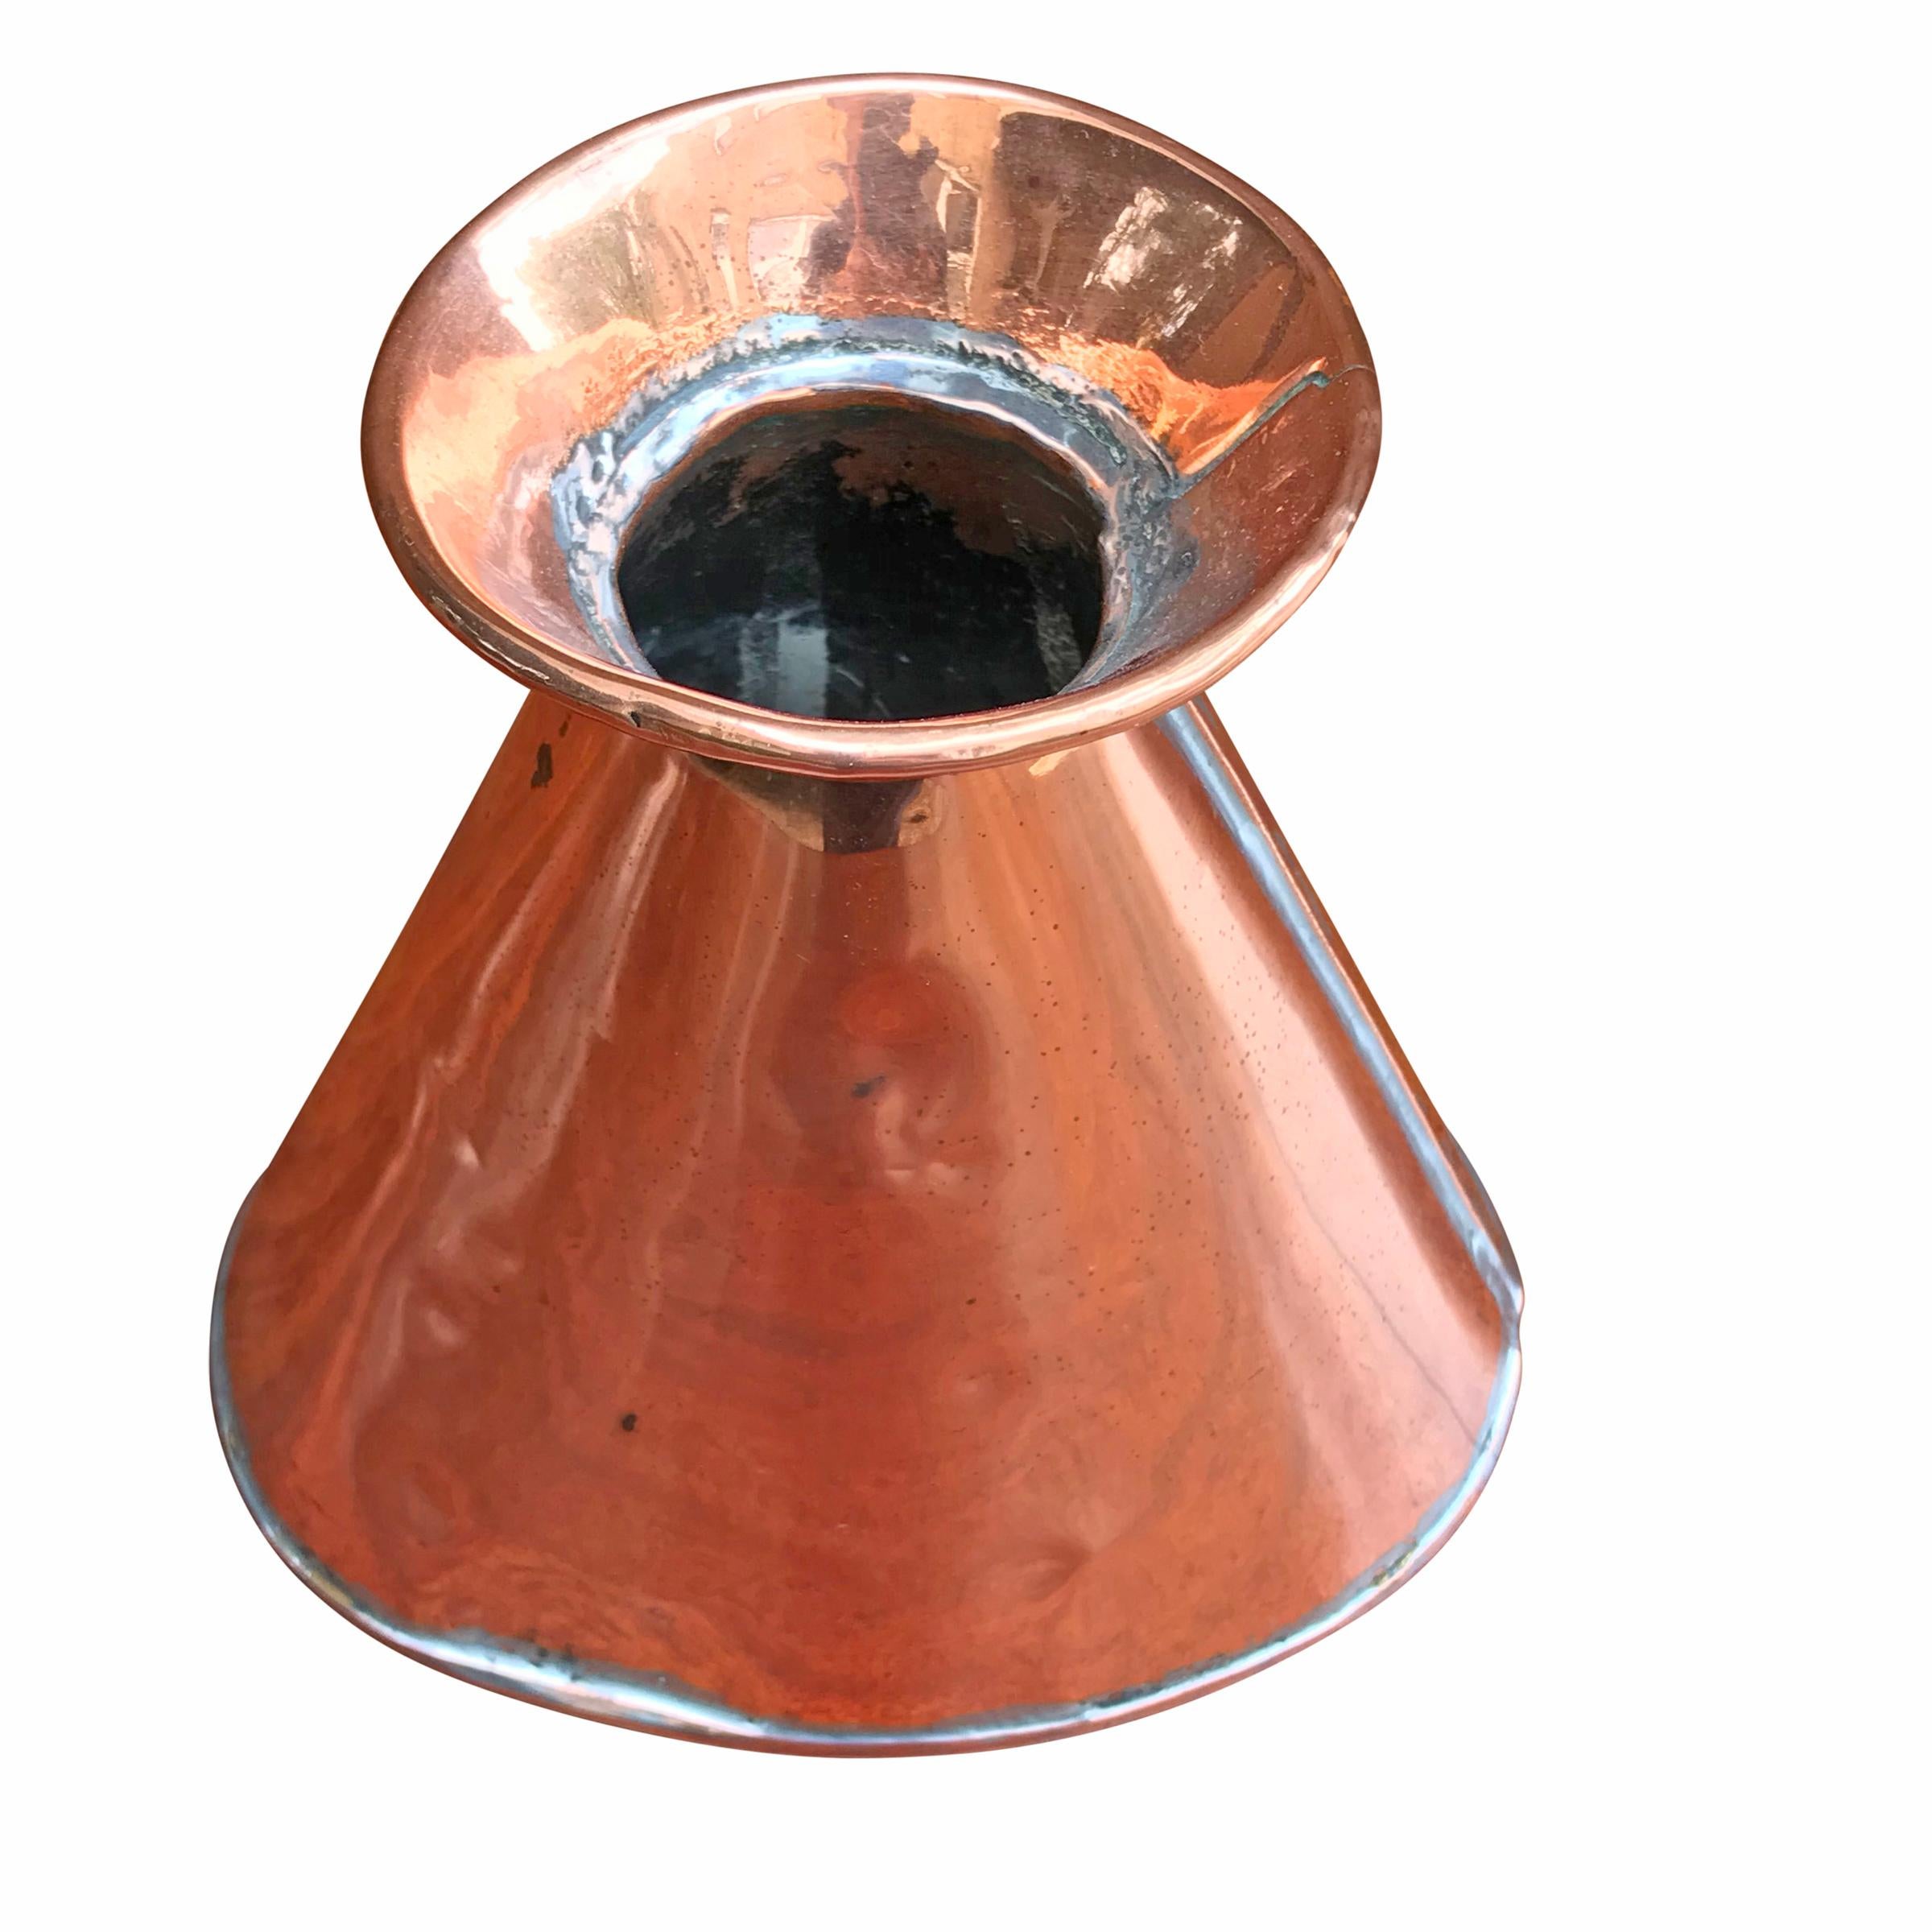 An early 19th century English, Victorian period, copper pitcher of tapered ovoid form with a flared lip. This is water tight, and would make the best vases with fresh flowers.